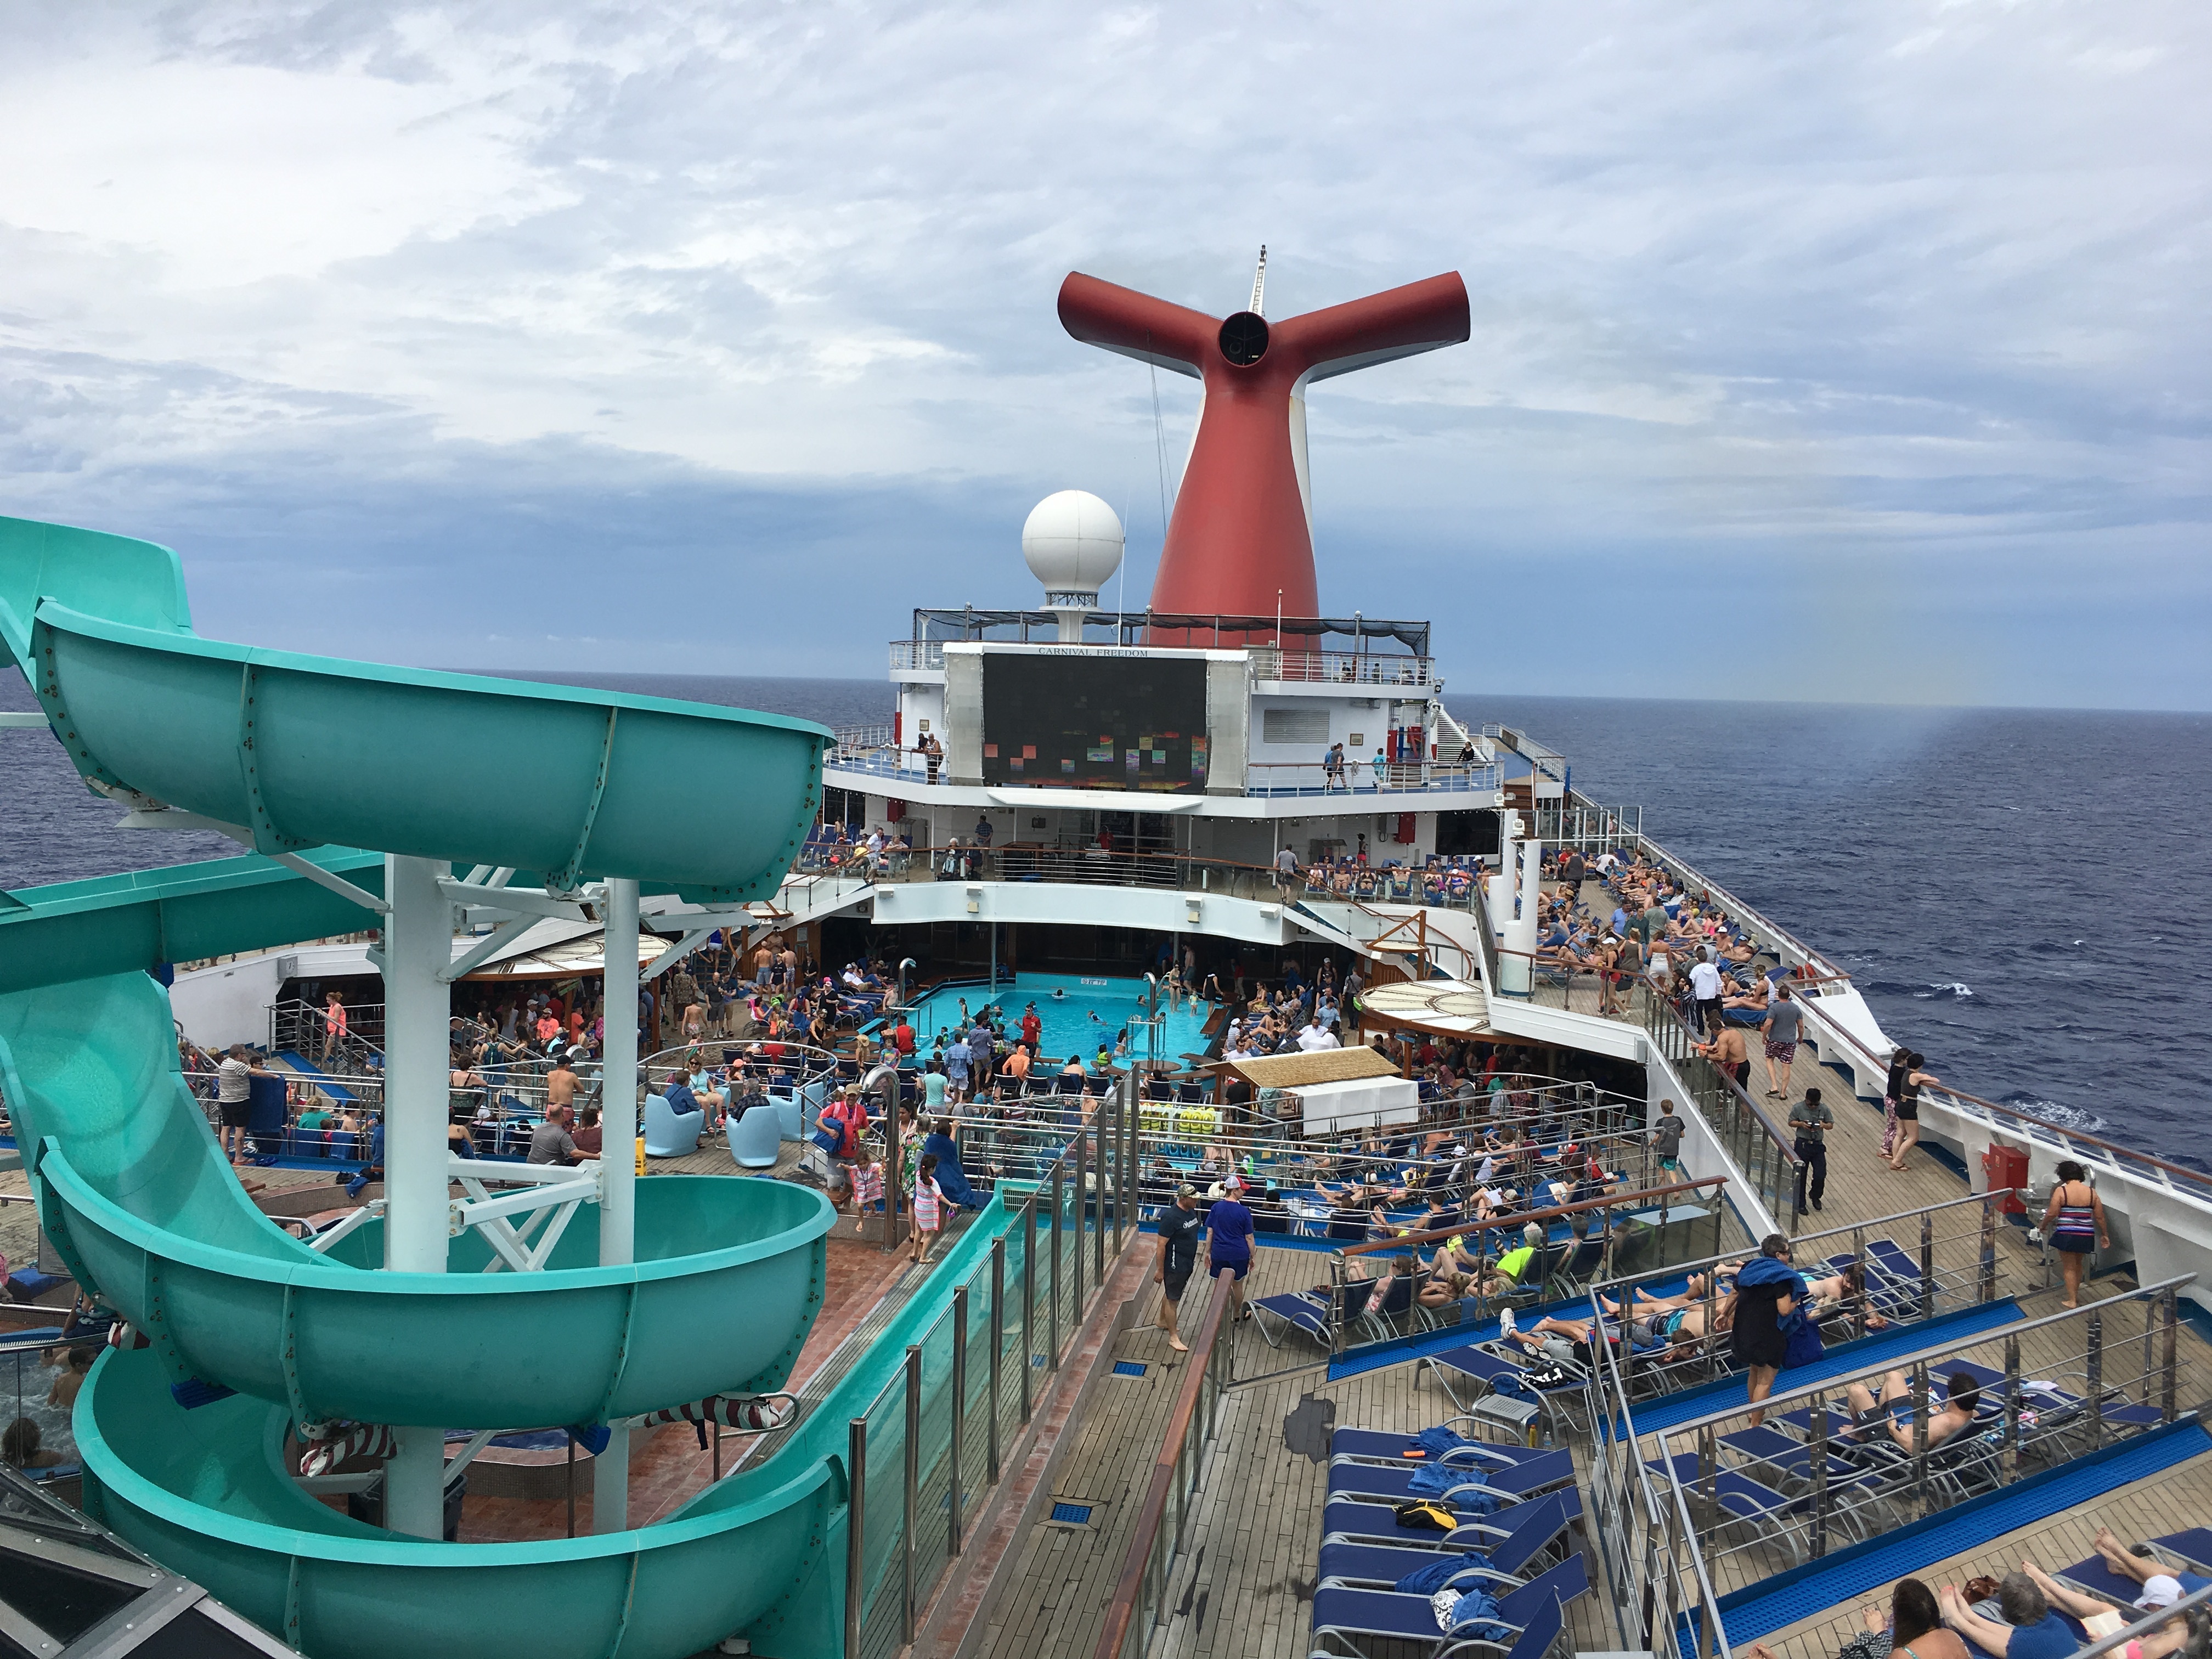 carnival cruise freedom review